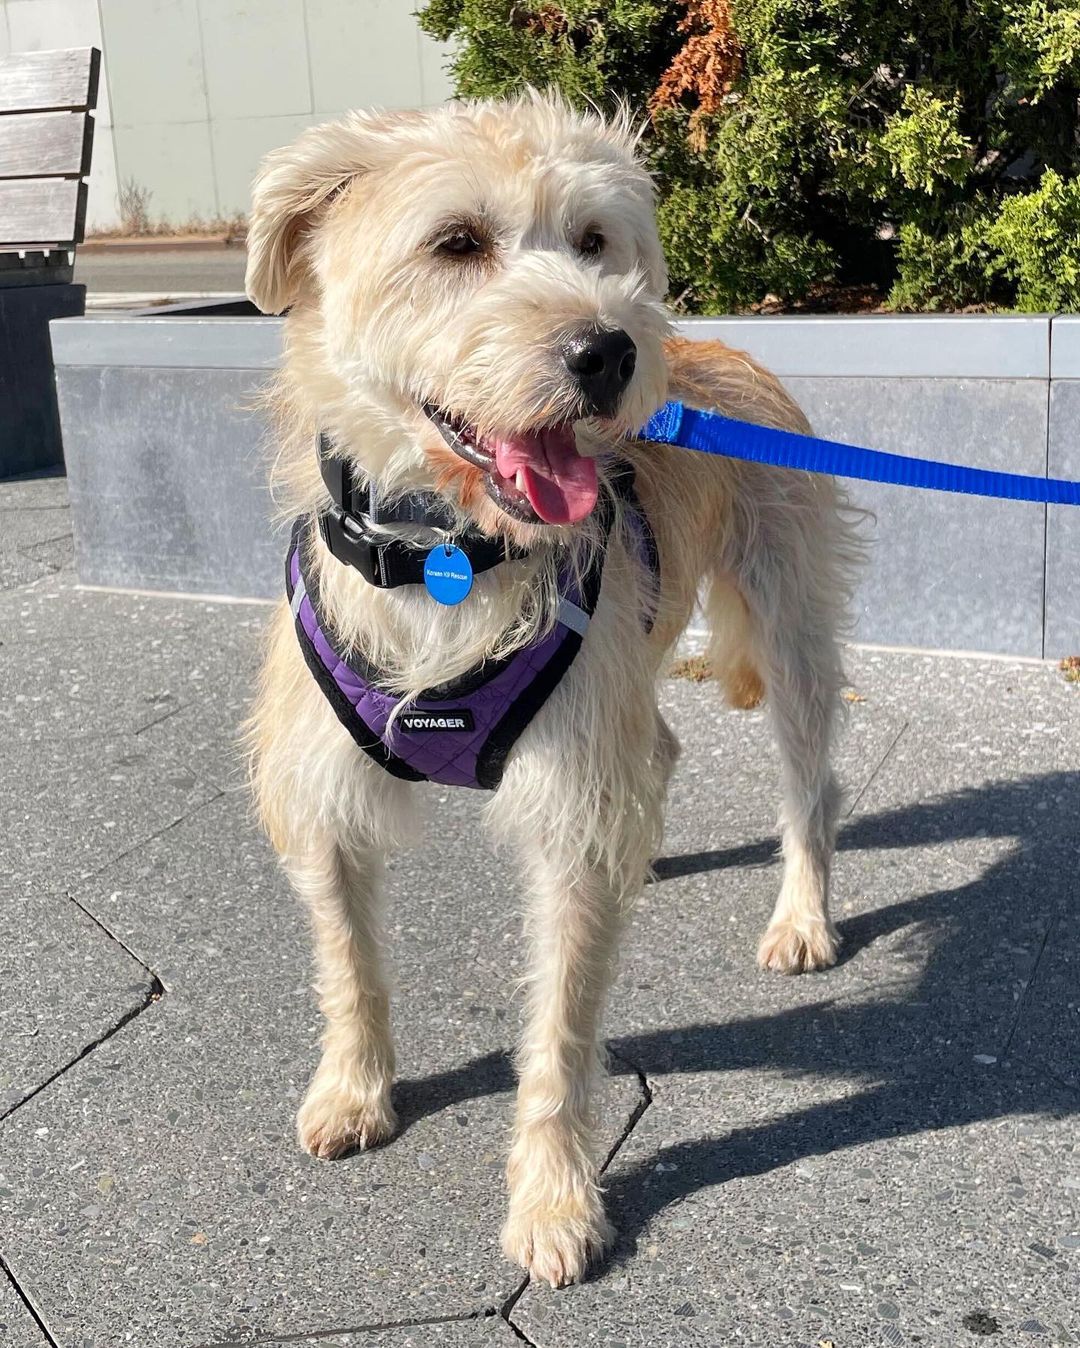 Here’s Nodam! 🤩 He’s a 2-year-old male Terrier mix and weighs about 35 pounds. We rescued him from the Aerinwon shelter in Korea and now he’s in NYC for adoption! Nodam’s best described as friendly, affectionate, sweet, and sensitive. He’s doing awesome with crate training and potty training so far. 🙌🏽 He’s also starting to play with toys, enjoys hanging out with his foster brother (dog), and likes being near his foster parents. He would do best with a patient adopter that can help him build more confidence with busy and loud areas outdoors. Nodam’s hoping he finds his forever home soon!

🐕 On a case-by-case basis, we accept applications from residents living within 30-miles of NYC and certain areas within CT, PA, D.C., MD, and MA. Check koreank9rescue.org/adopt for more details! 📝⁠⁠⁠⁠⁠⁠⁠⁠⁠⁠⁠⁠⁠

<a target='_blank' href='https://www.instagram.com/explore/tags/terrier/'>#terrier</a> <a target='_blank' href='https://www.instagram.com/explore/tags/adoptmenyc/'>#adoptmenyc</a> <a target='_blank' href='https://www.instagram.com/explore/tags/nyc/'>#nyc</a> <a target='_blank' href='https://www.instagram.com/explore/tags/korea/'>#korea</a> <a target='_blank' href='https://www.instagram.com/explore/tags/adoptme/'>#adoptme</a> <a target='_blank' href='https://www.instagram.com/explore/tags/adoptmeplease/'>#adoptmeplease</a> <a target='_blank' href='https://www.instagram.com/explore/tags/koreank9rescue/'>#koreank9rescue</a> <a target='_blank' href='https://www.instagram.com/explore/tags/kk9r/'>#kk9r</a> <a target='_blank' href='https://www.instagram.com/explore/tags/spay/'>#spay</a> <a target='_blank' href='https://www.instagram.com/explore/tags/neuter/'>#neuter</a> <a target='_blank' href='https://www.instagram.com/explore/tags/rescueismyfavoritebreed/'>#rescueismyfavoritebreed</a> <a target='_blank' href='https://www.instagram.com/explore/tags/rescuedog/'>#rescuedog</a> <a target='_blank' href='https://www.instagram.com/explore/tags/everydogdeserveslove/'>#everydogdeserveslove</a> <a target='_blank' href='https://www.instagram.com/explore/tags/showlovekorea/'>#showlovekorea</a>